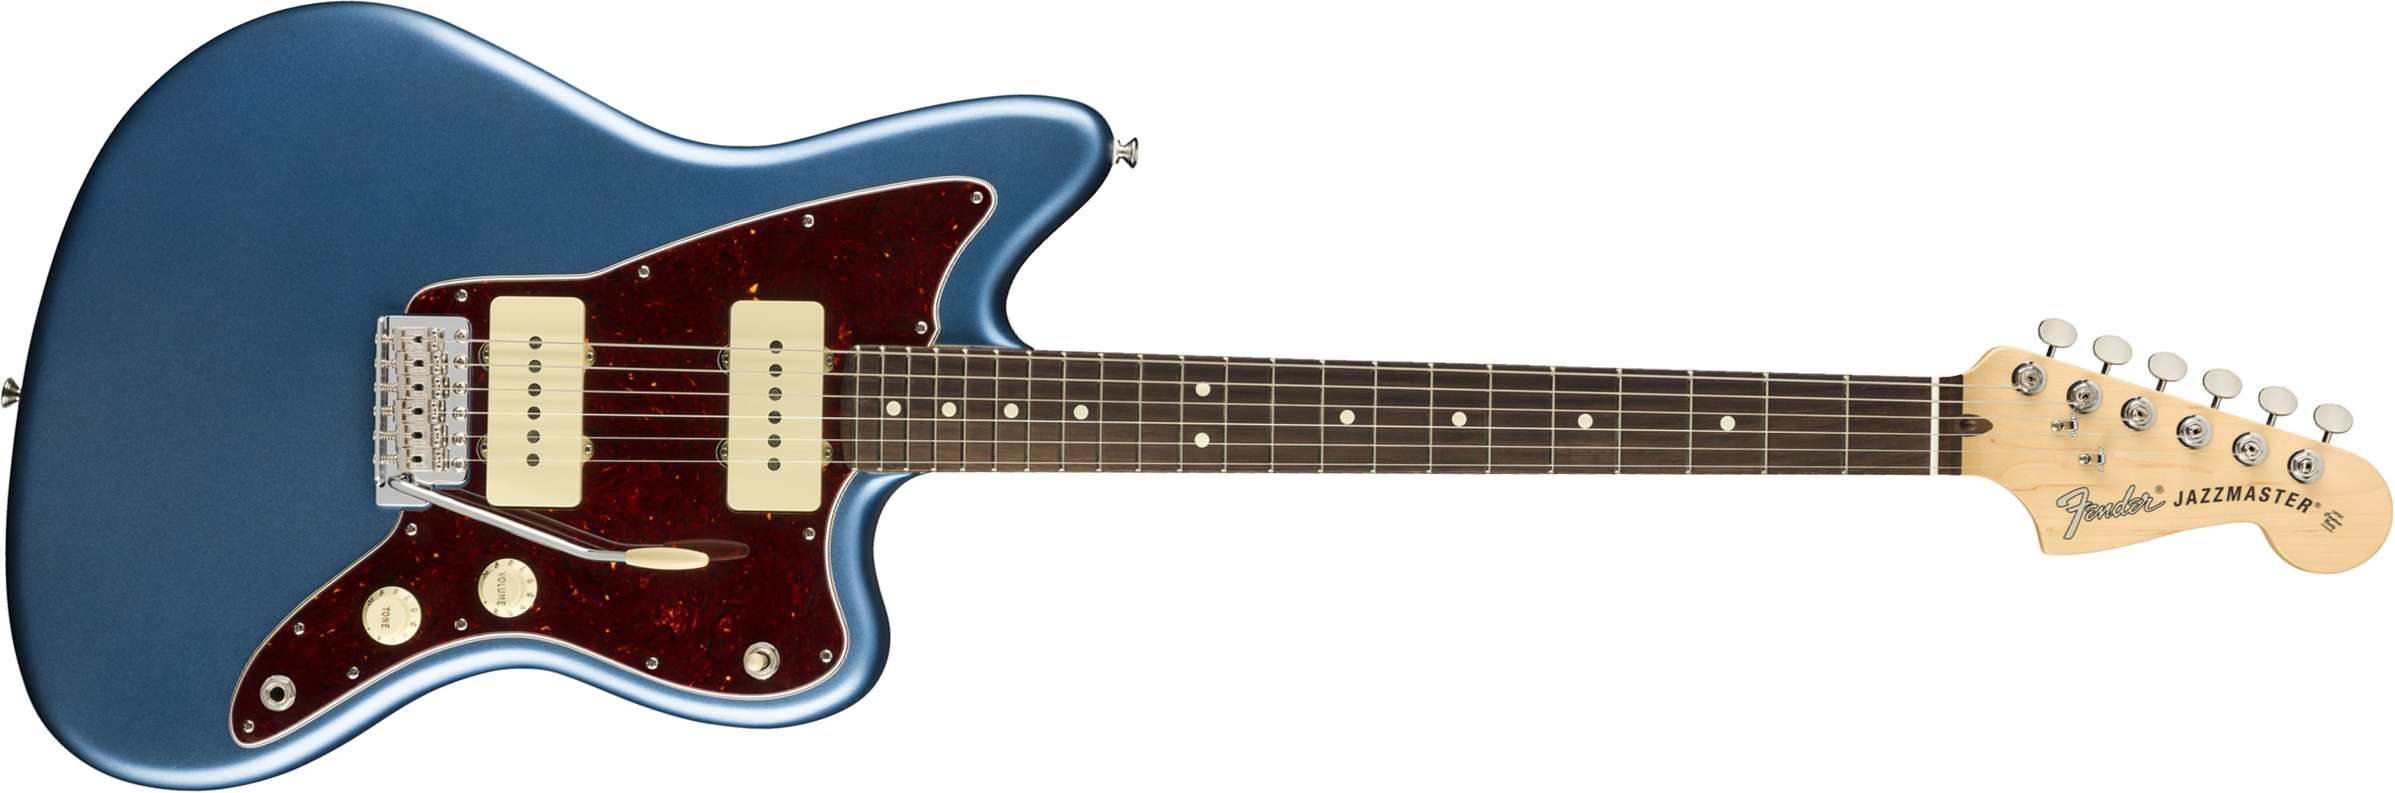 Fender Jazzmaster American Performer Usa Ss Rw - Satin Lake Placid Blue - Double cut electric guitar - Main picture